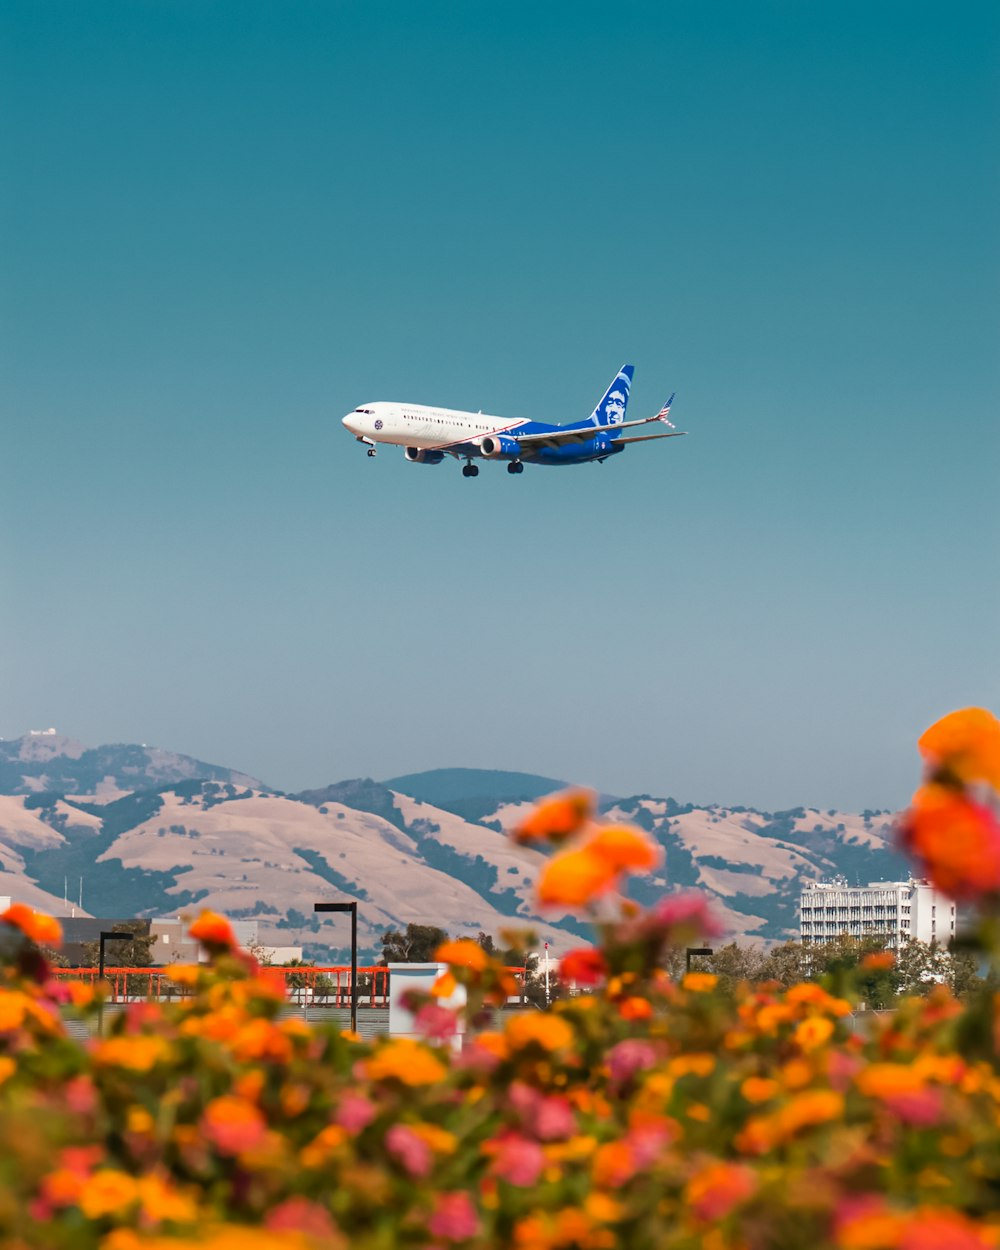 white and blue airplane flying over the orange flower field during daytime